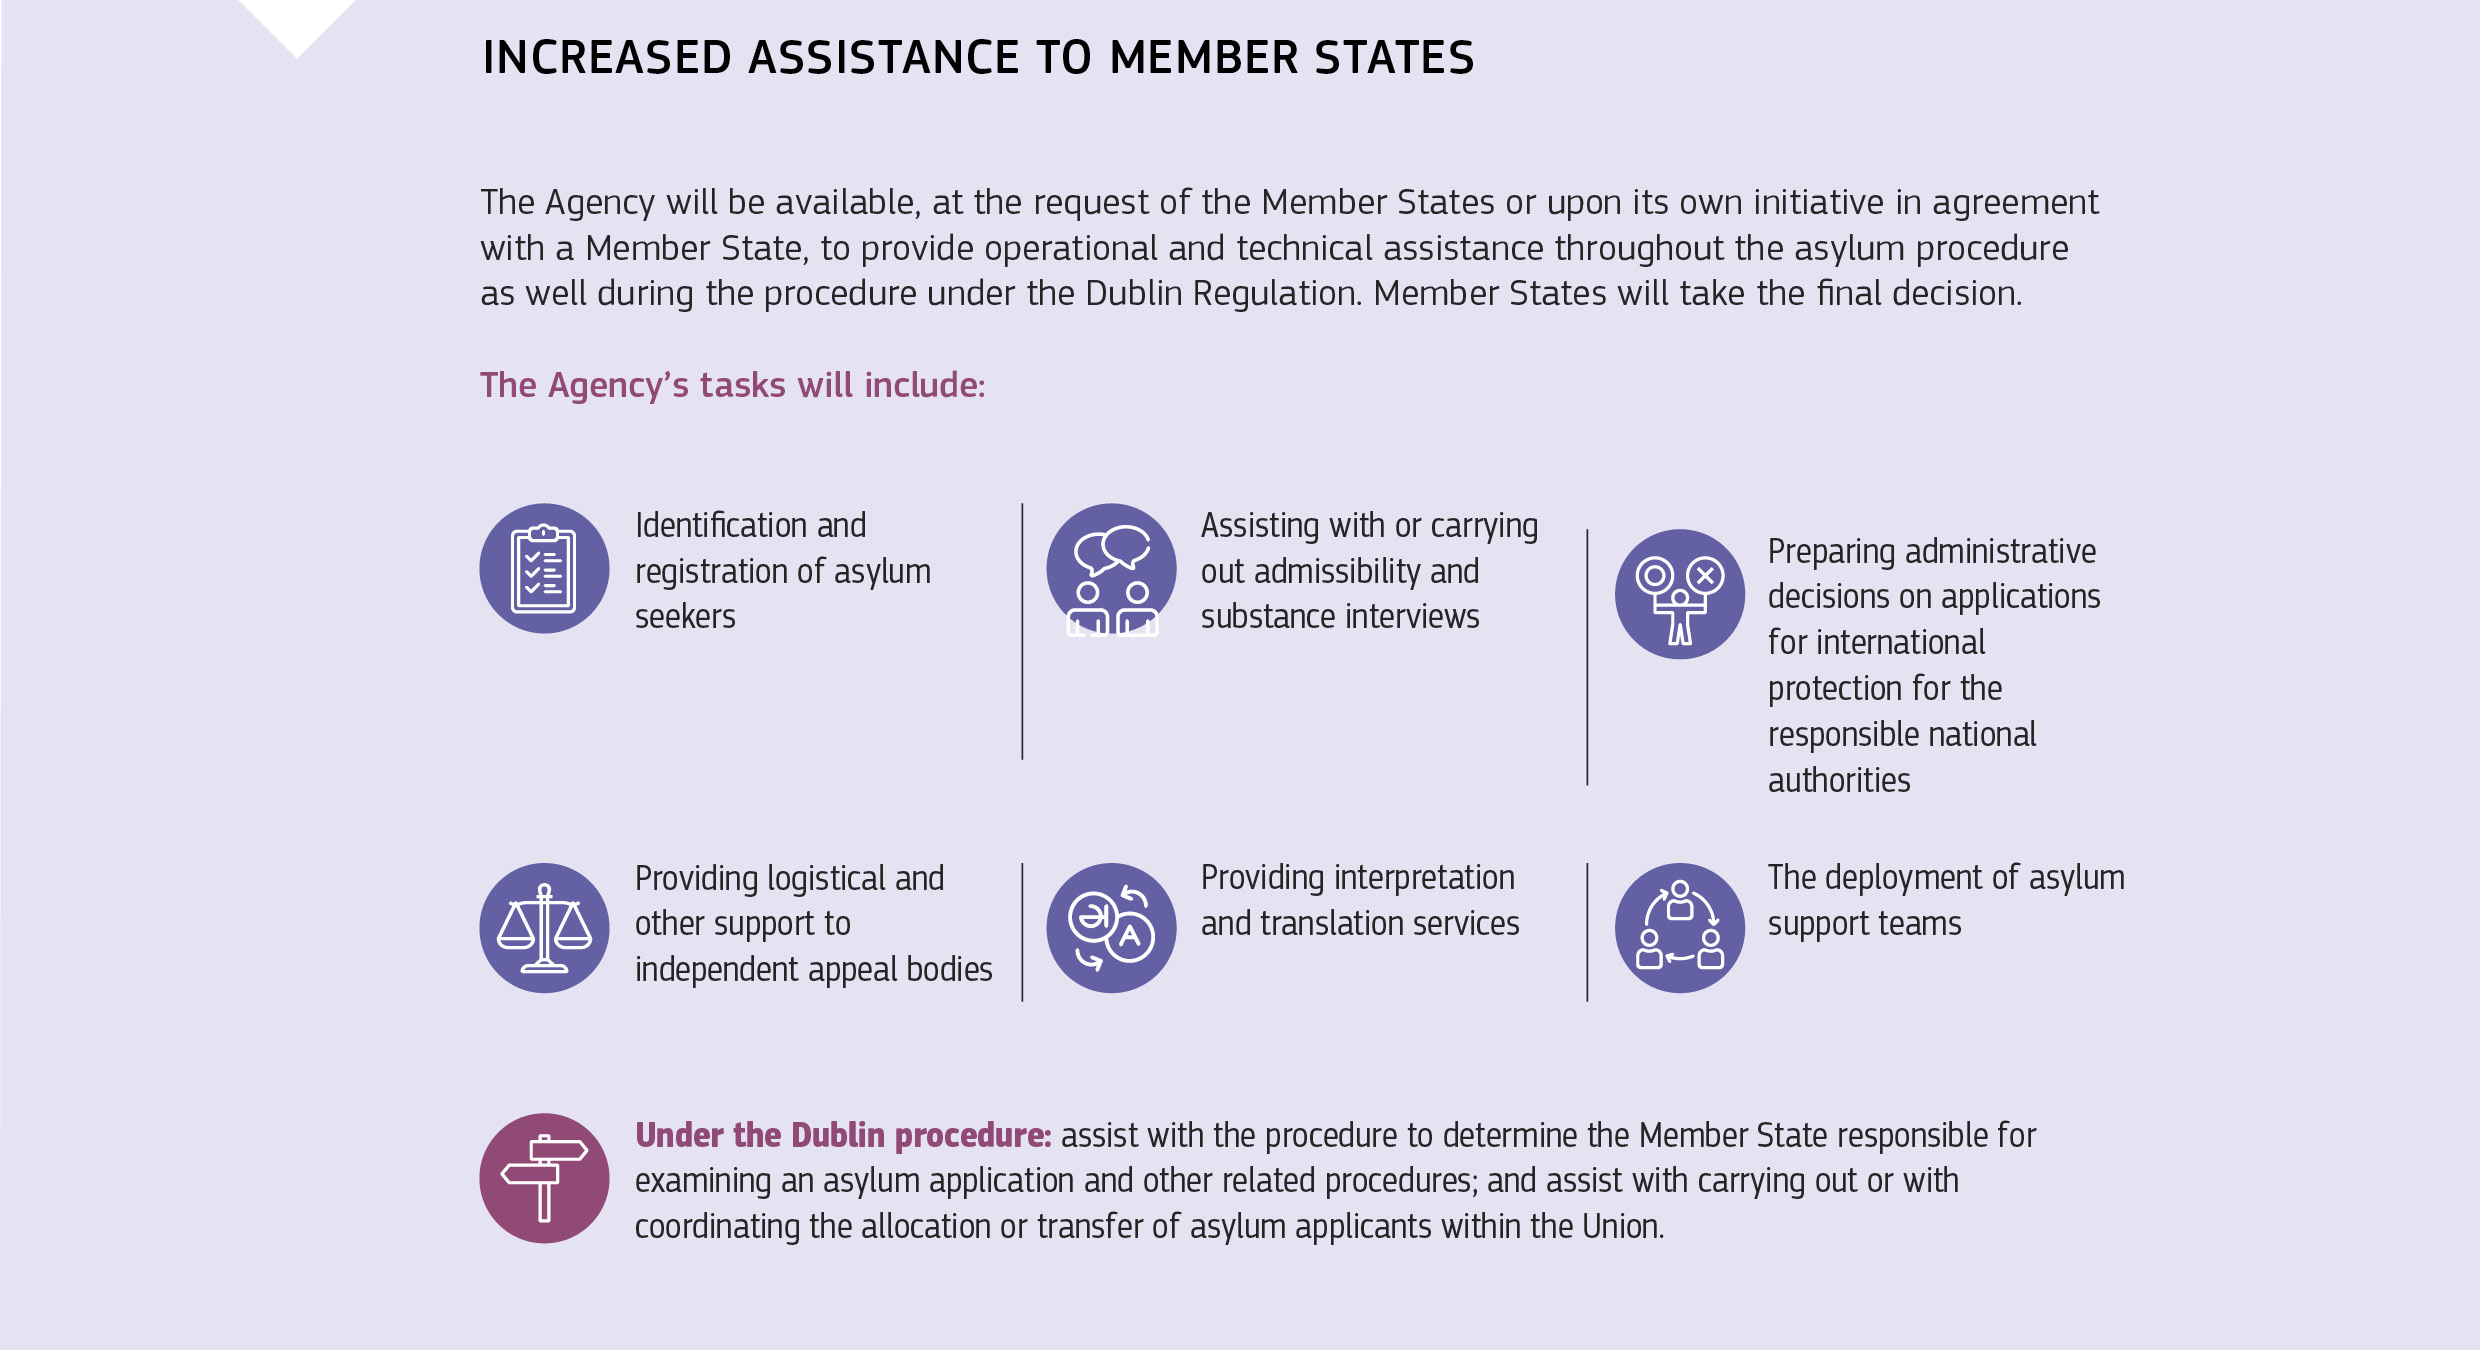 INCREASED ASSISTANCE TO MEMBER STATES